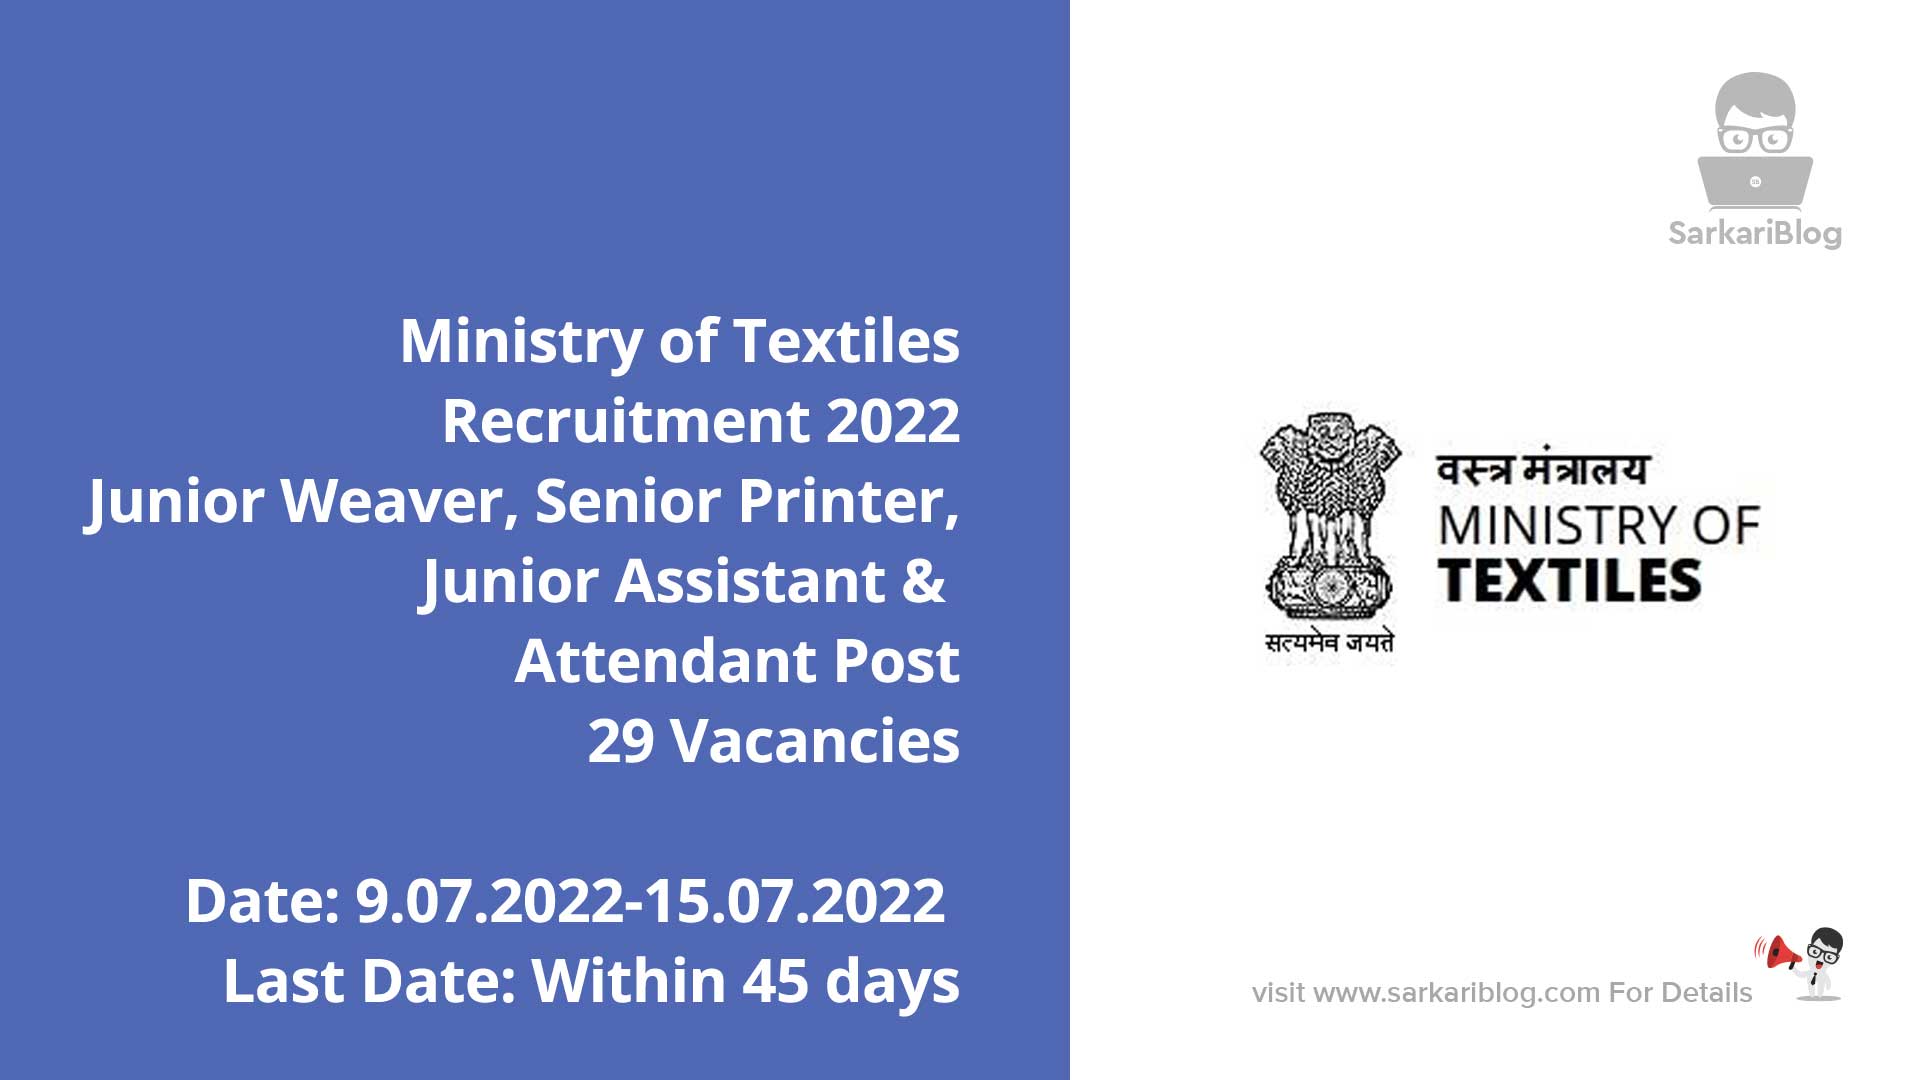 Ministry of Textiles Recruitment 2022